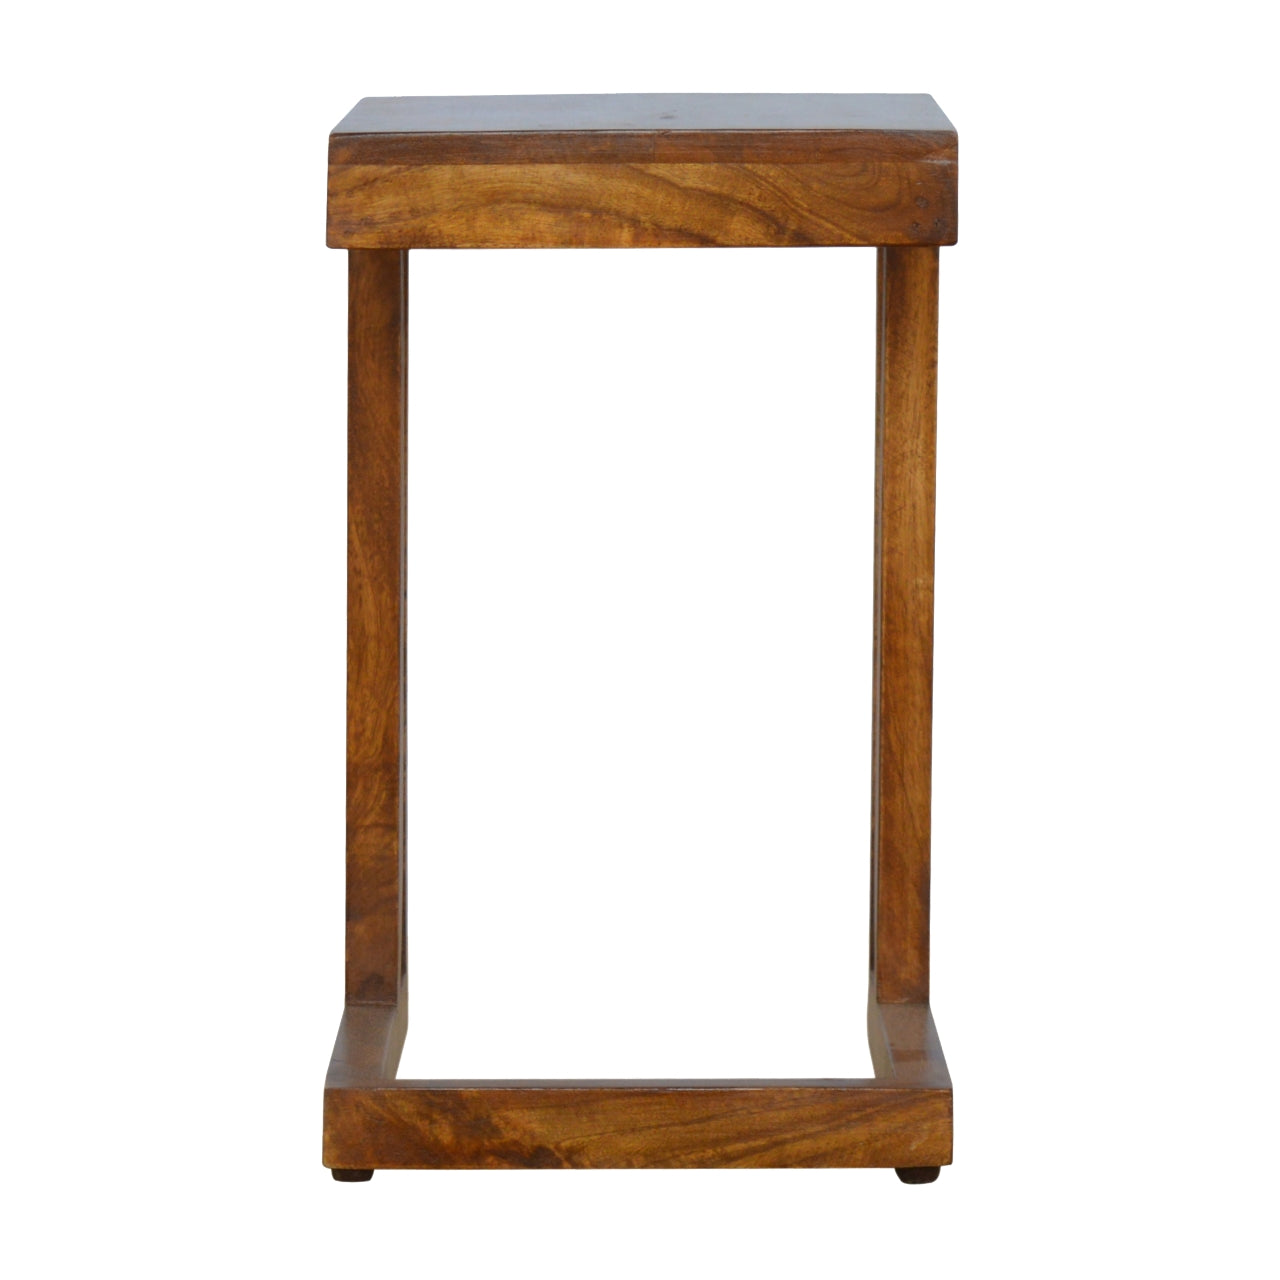 View Chestnut Finish Onesided End Table information